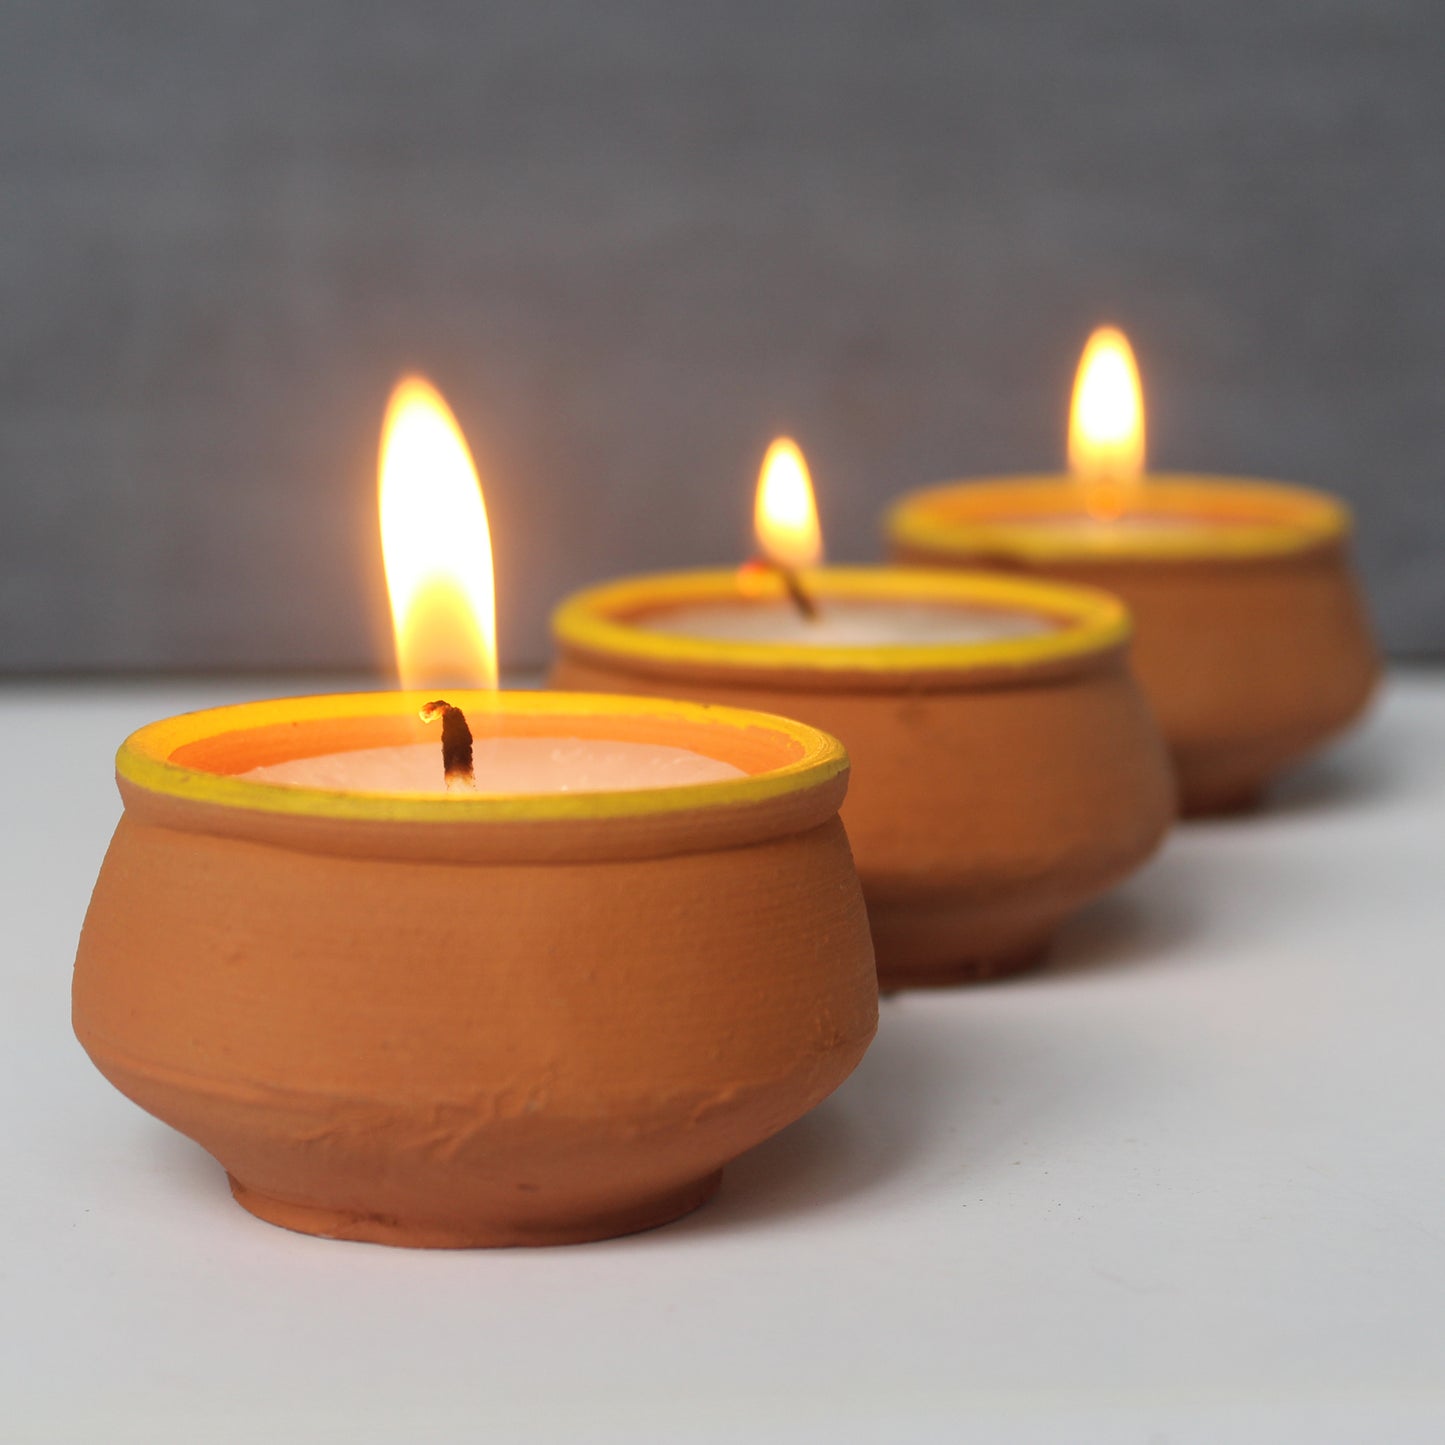 Handcrafted Terracotta "Handi" Candles Set of 12